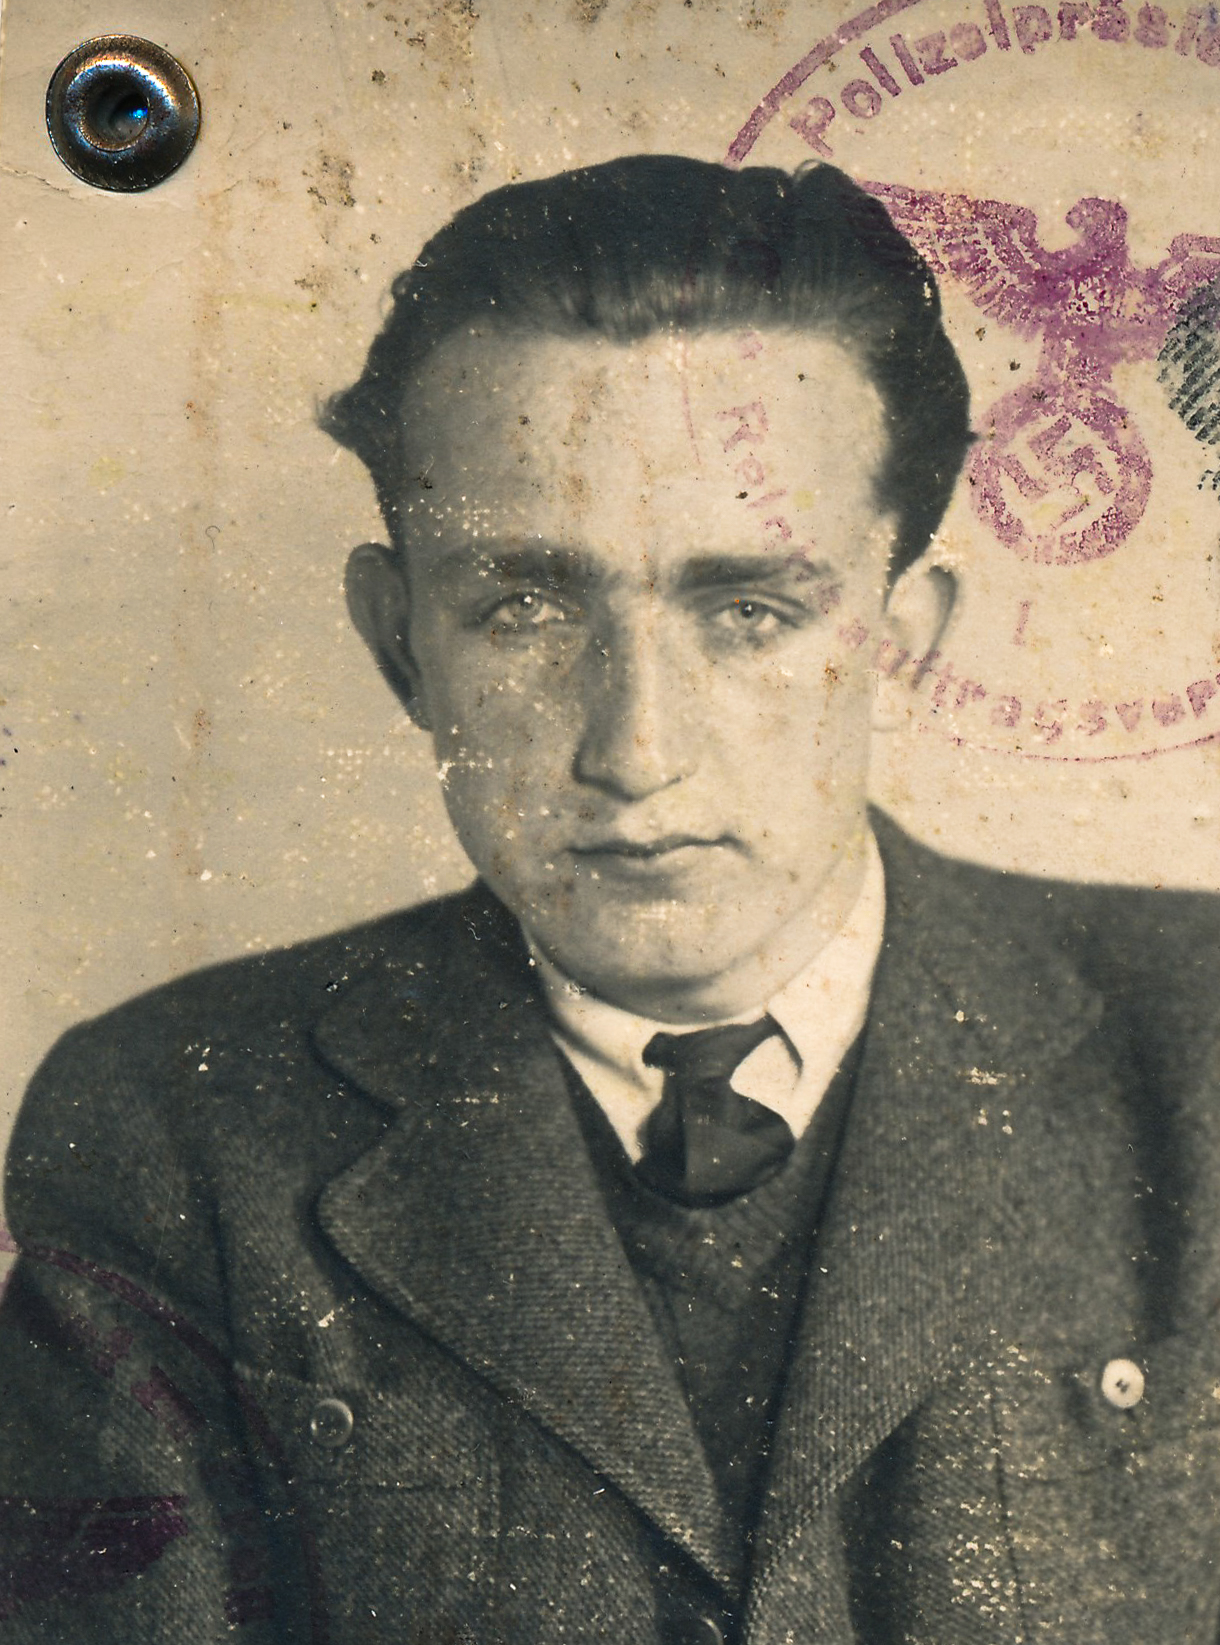 František Toulec, photo from the Kennkarte, an identity card issued by the Germans during the Second World War 